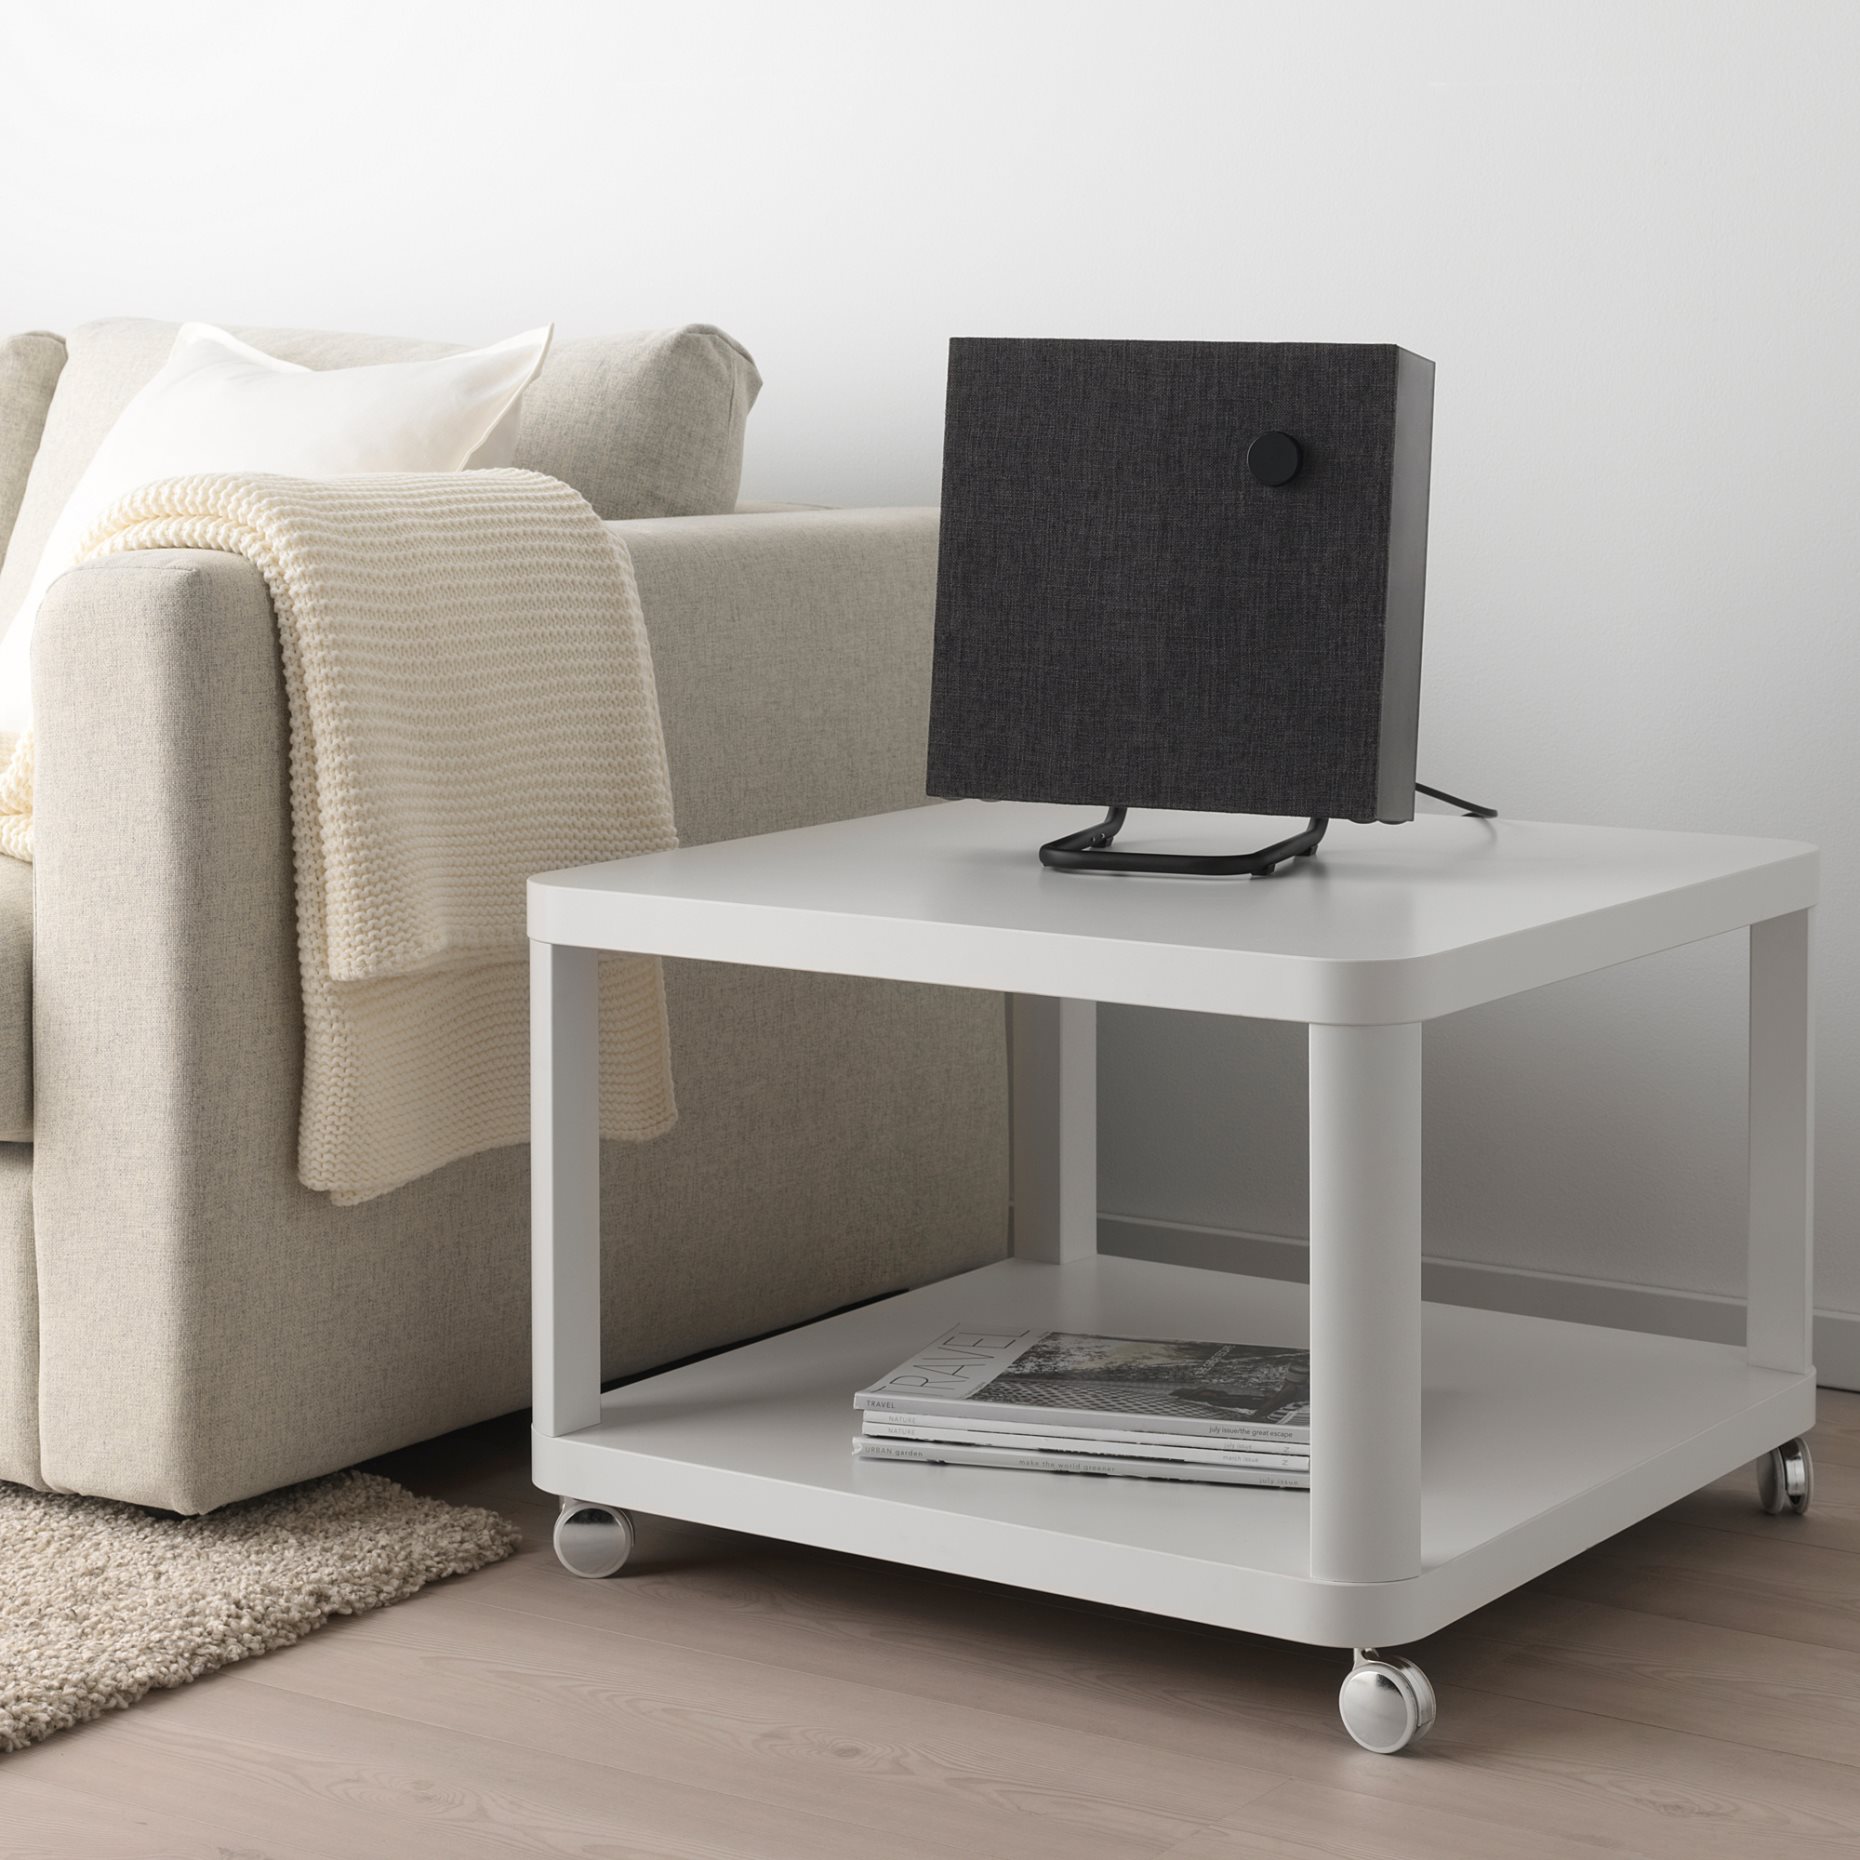 ENEBY, speaker stand, 403.575.78